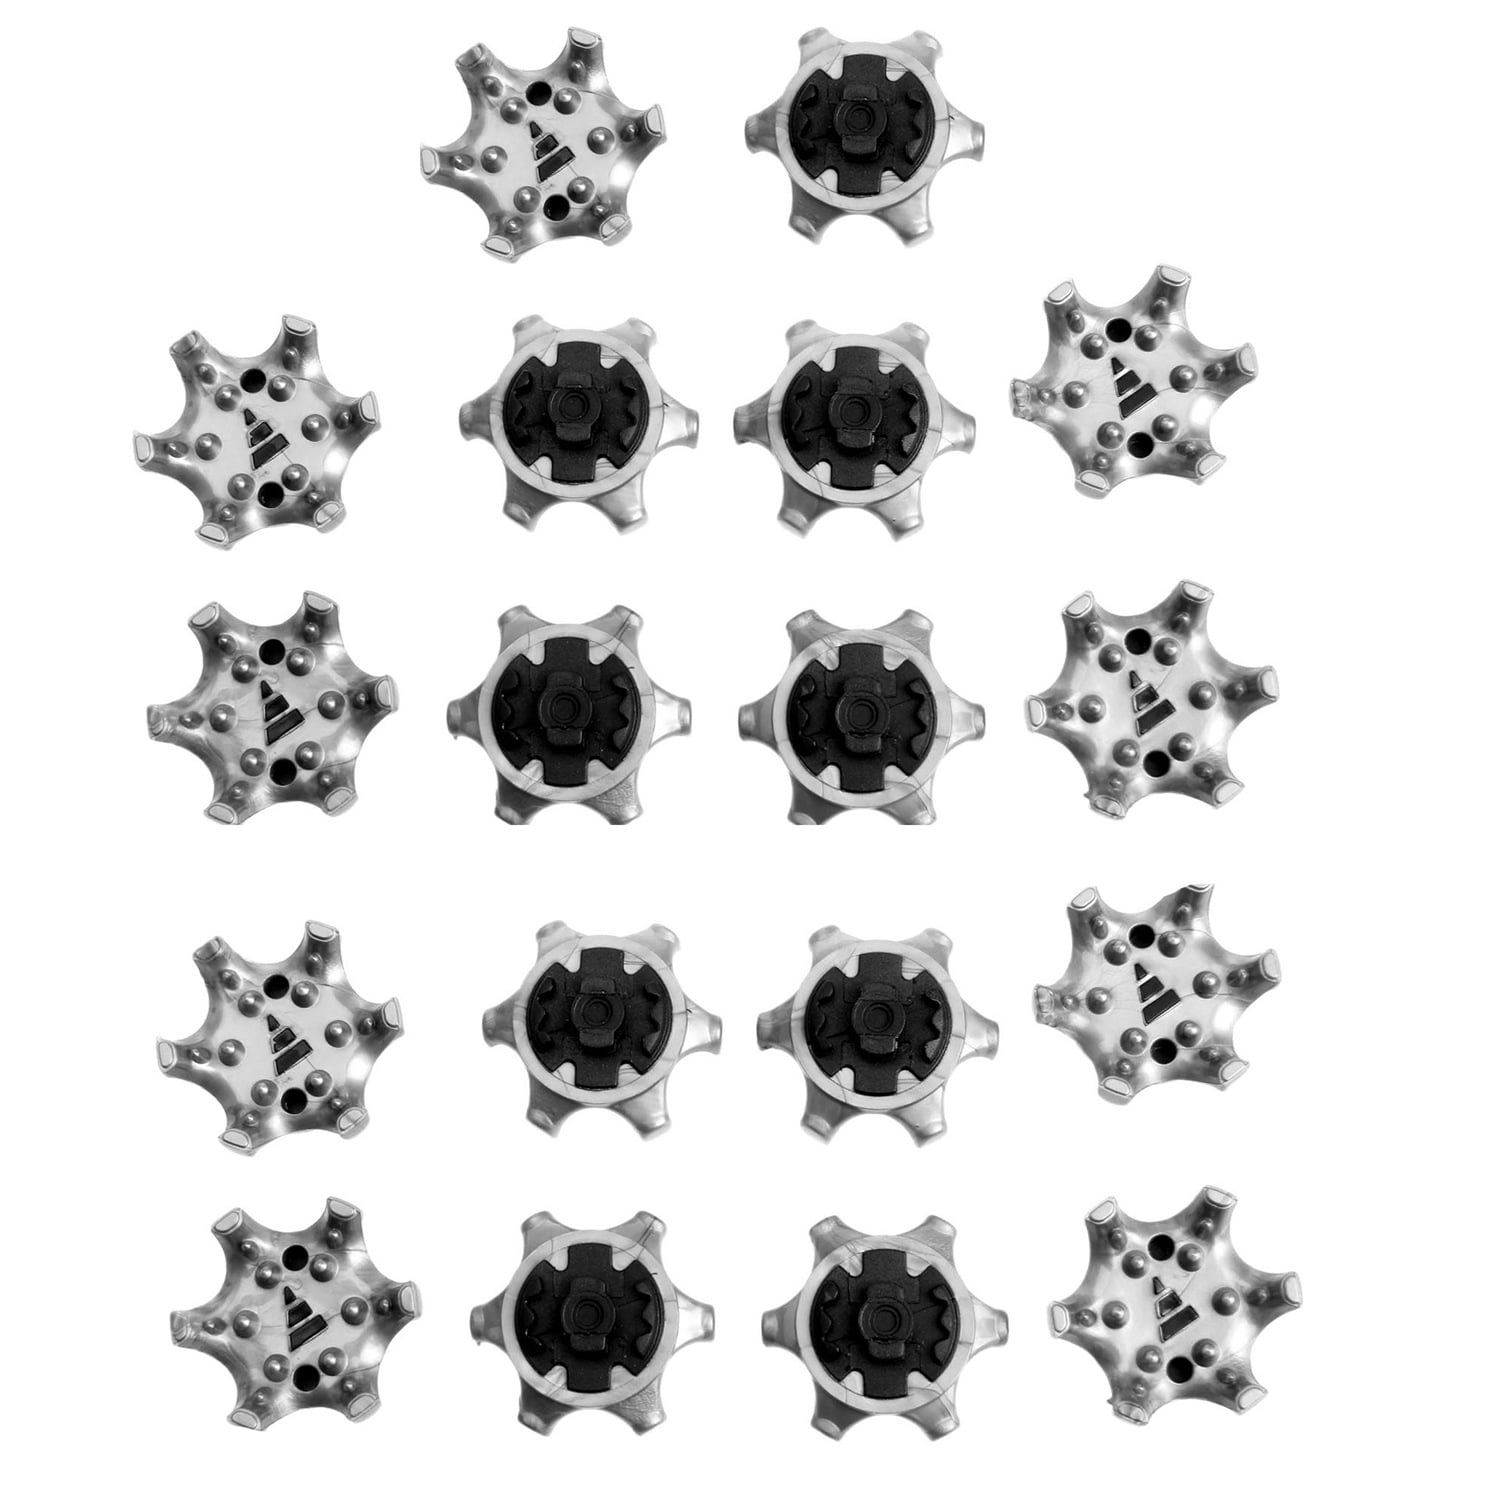 18 Shoe Spikes for Shoes Easy to Fits Shoes Models - Walmart.com